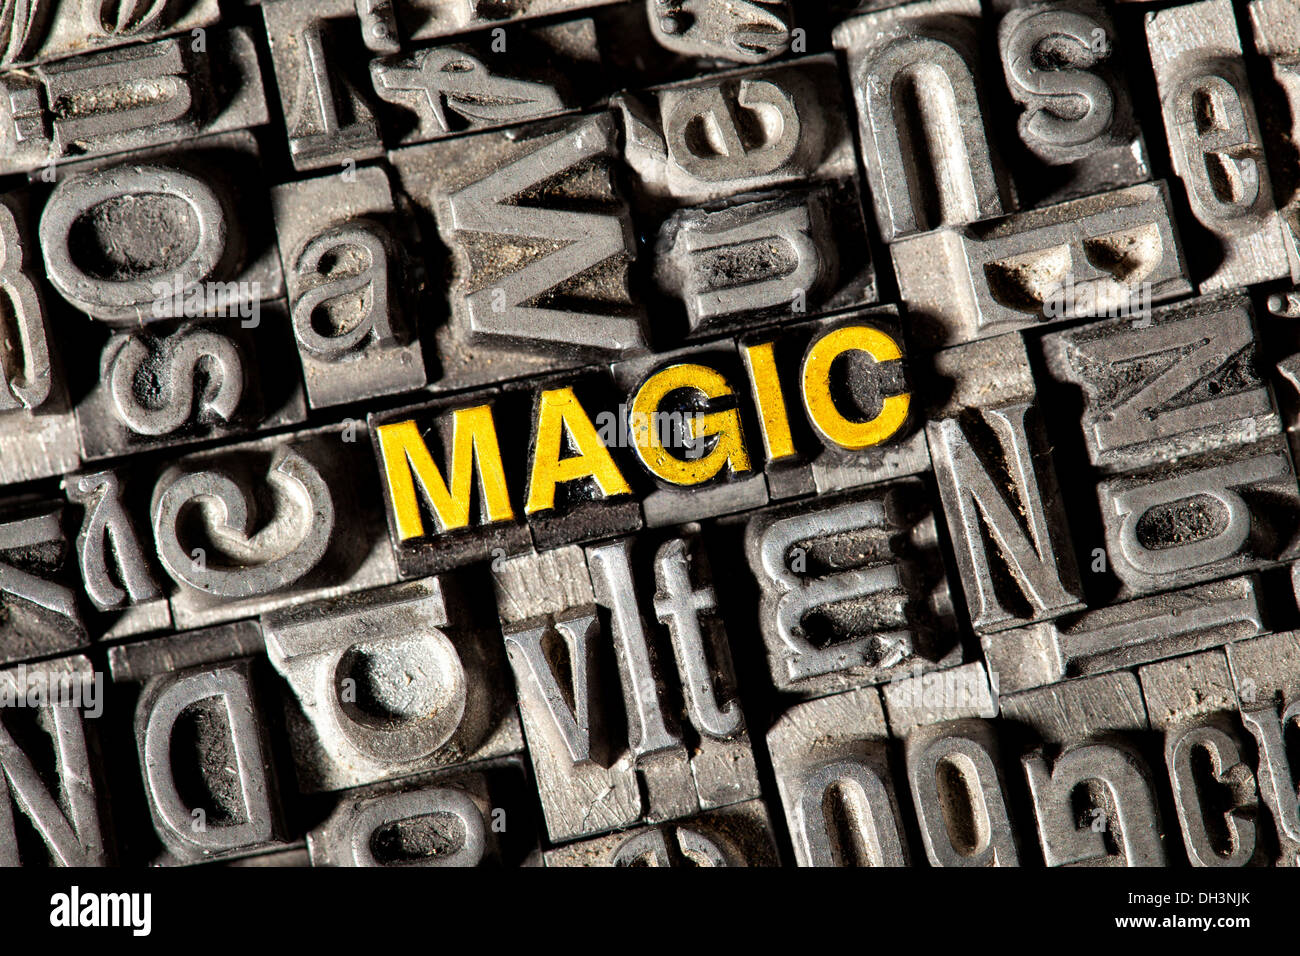 Old lead letters forming the word 'MAGIC' Stock Photo